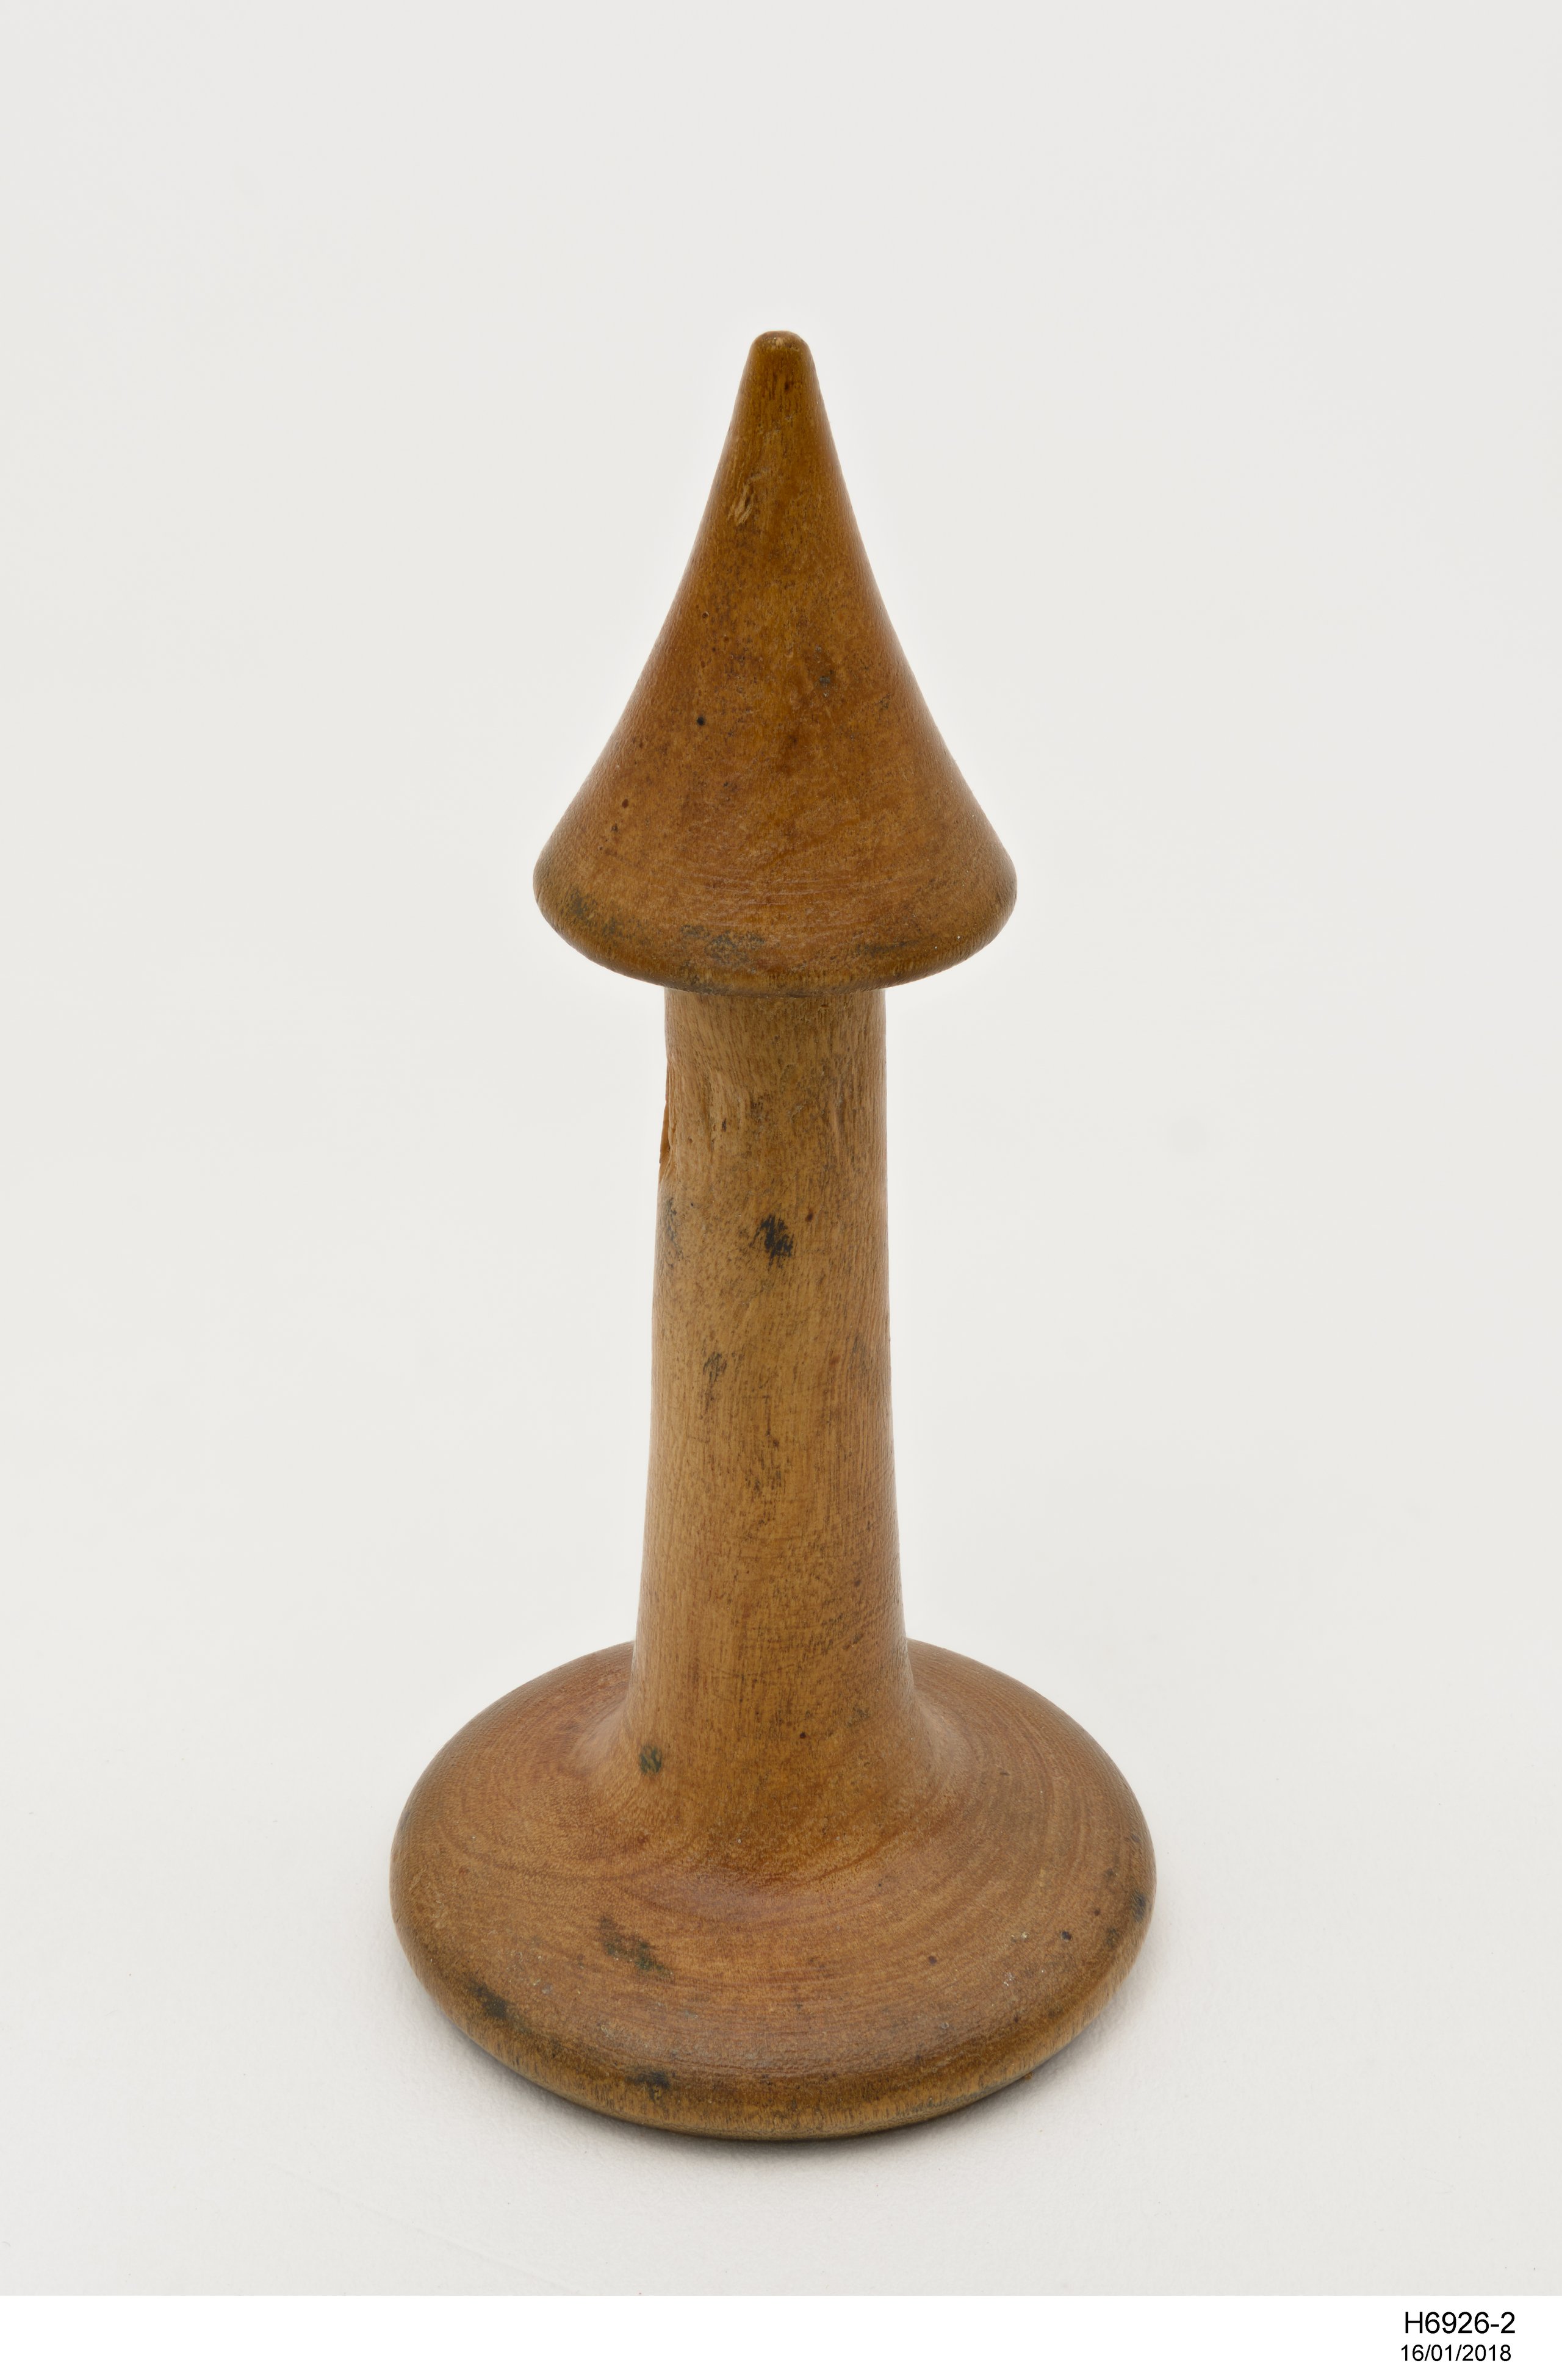 Camel pack saddle, nose peg, bell and hobbles used by Afghan camel drivers in South Australia, 1870-1900